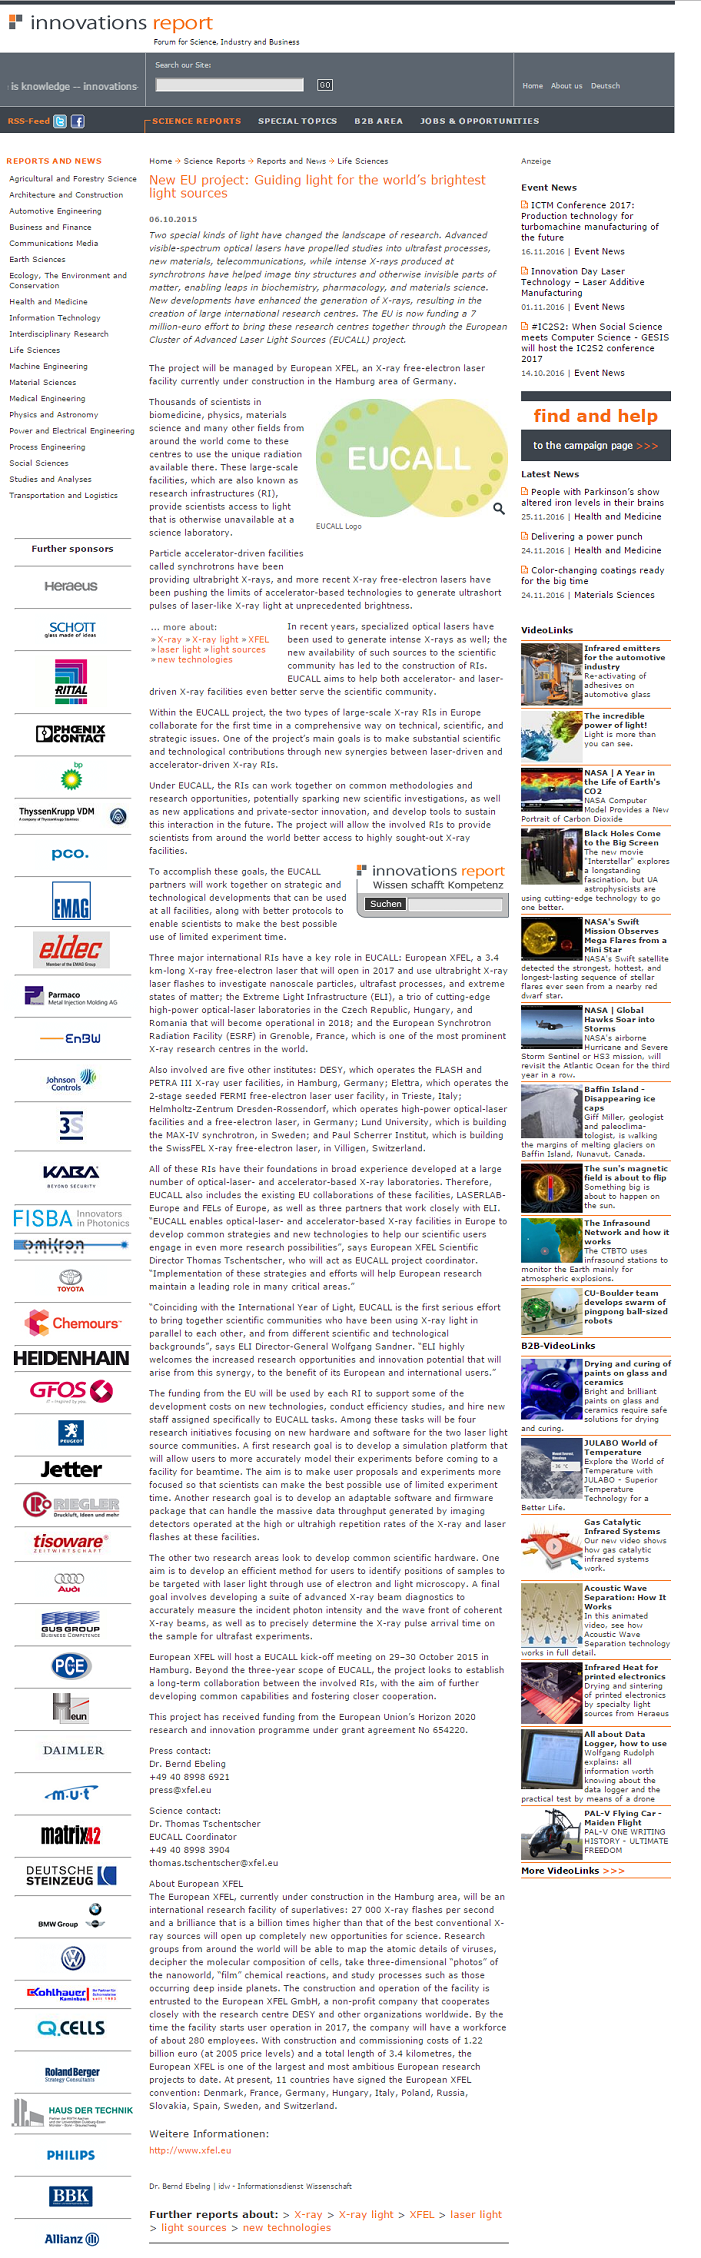 InnovationsReportOct2015-small.png